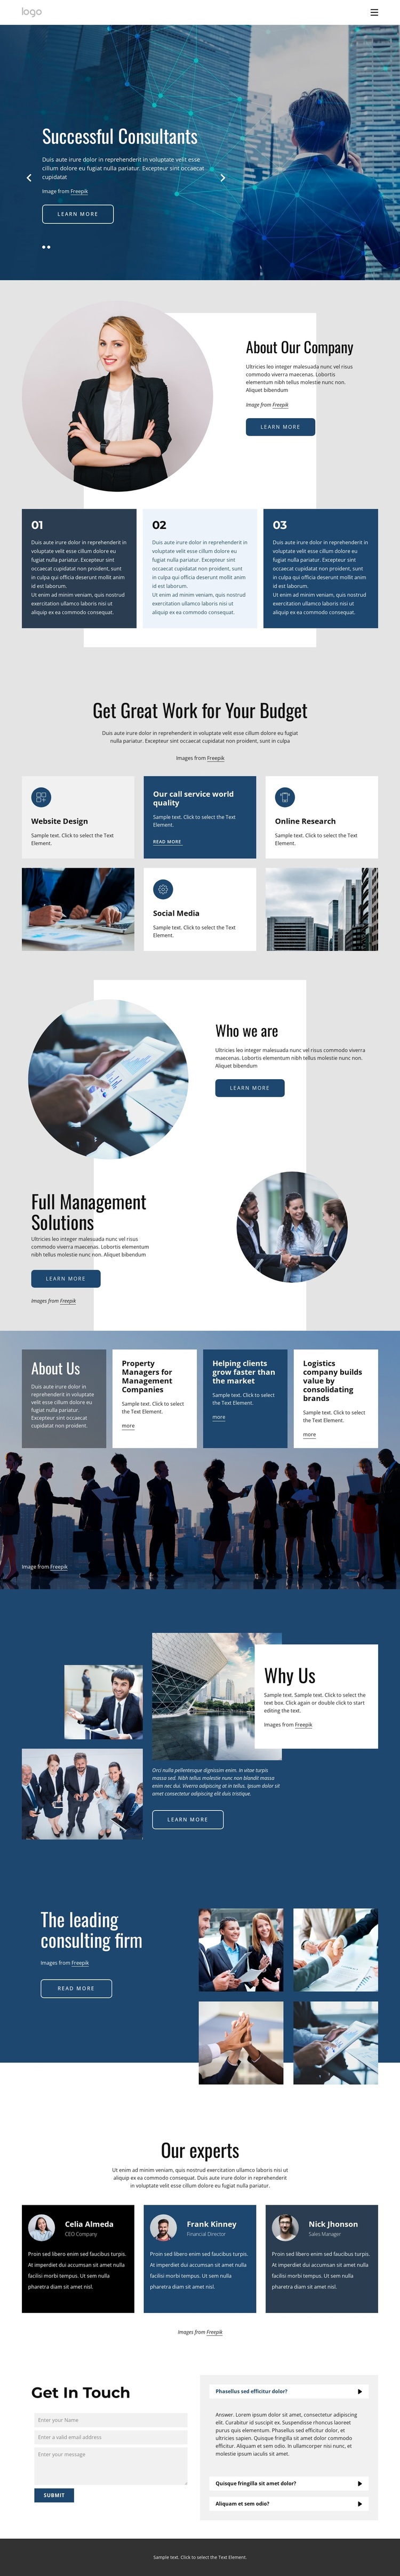 We offer tailored consulting services Template